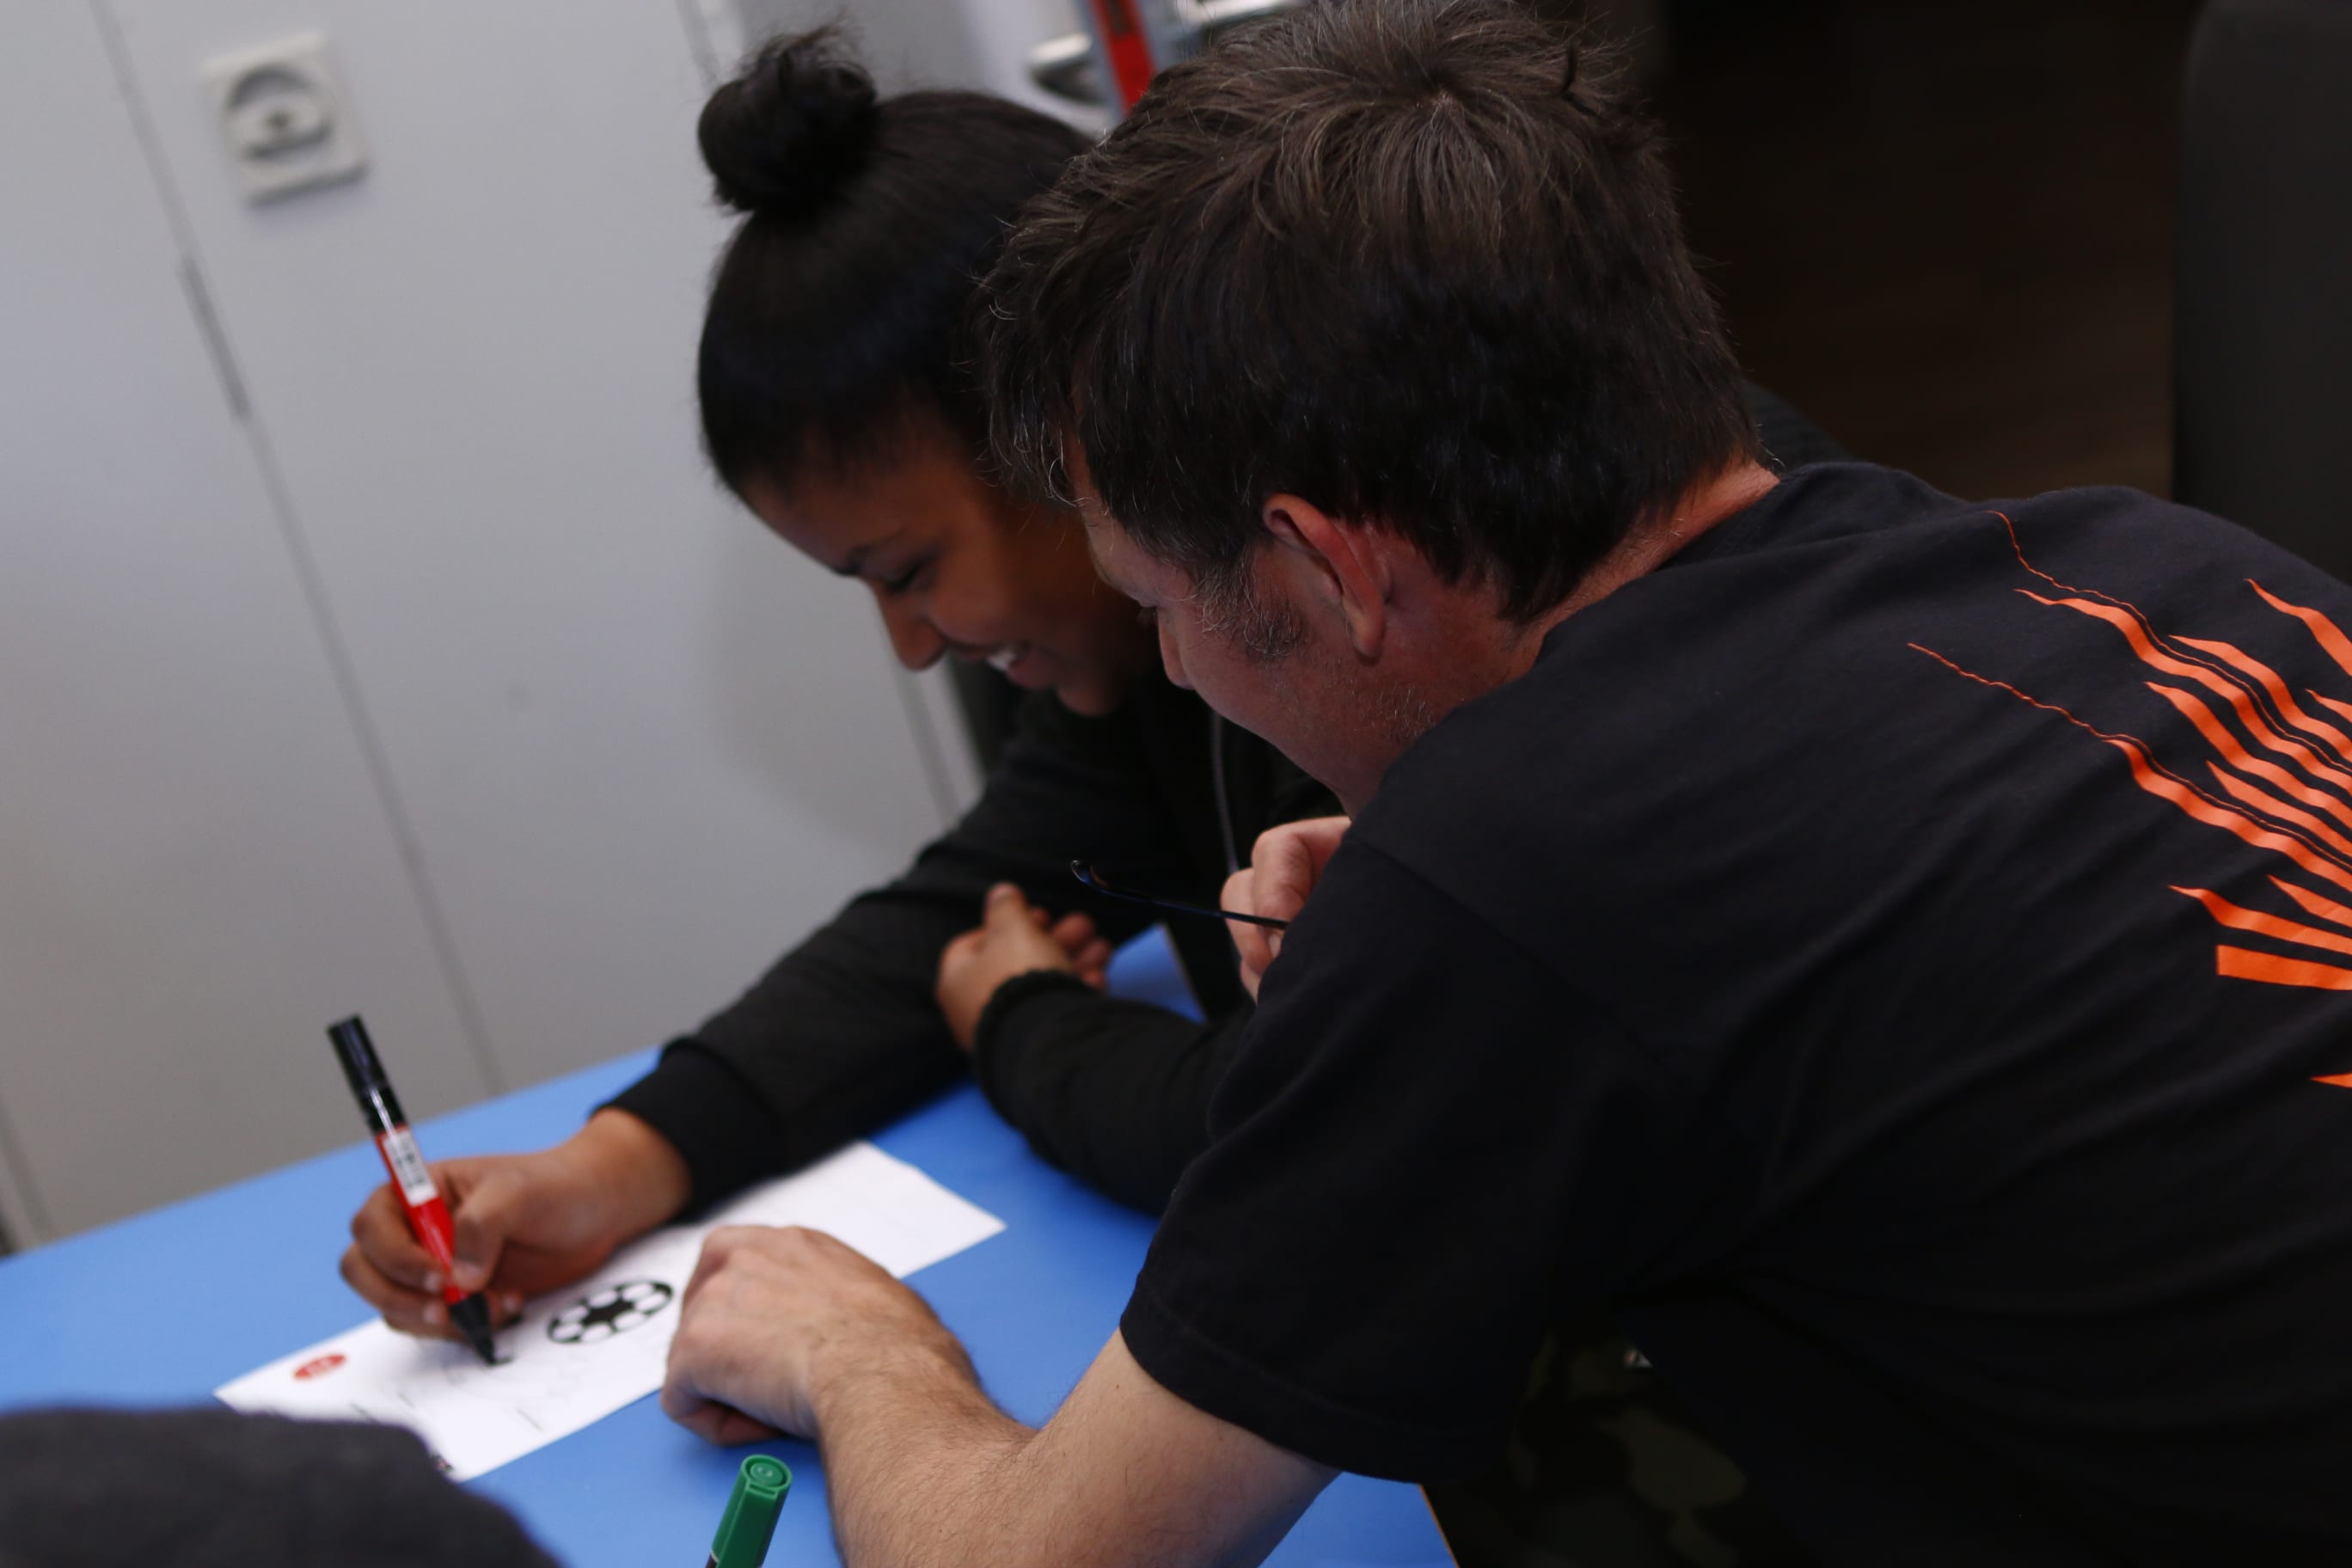 A member of staff helps a young woman to fill in paperwork